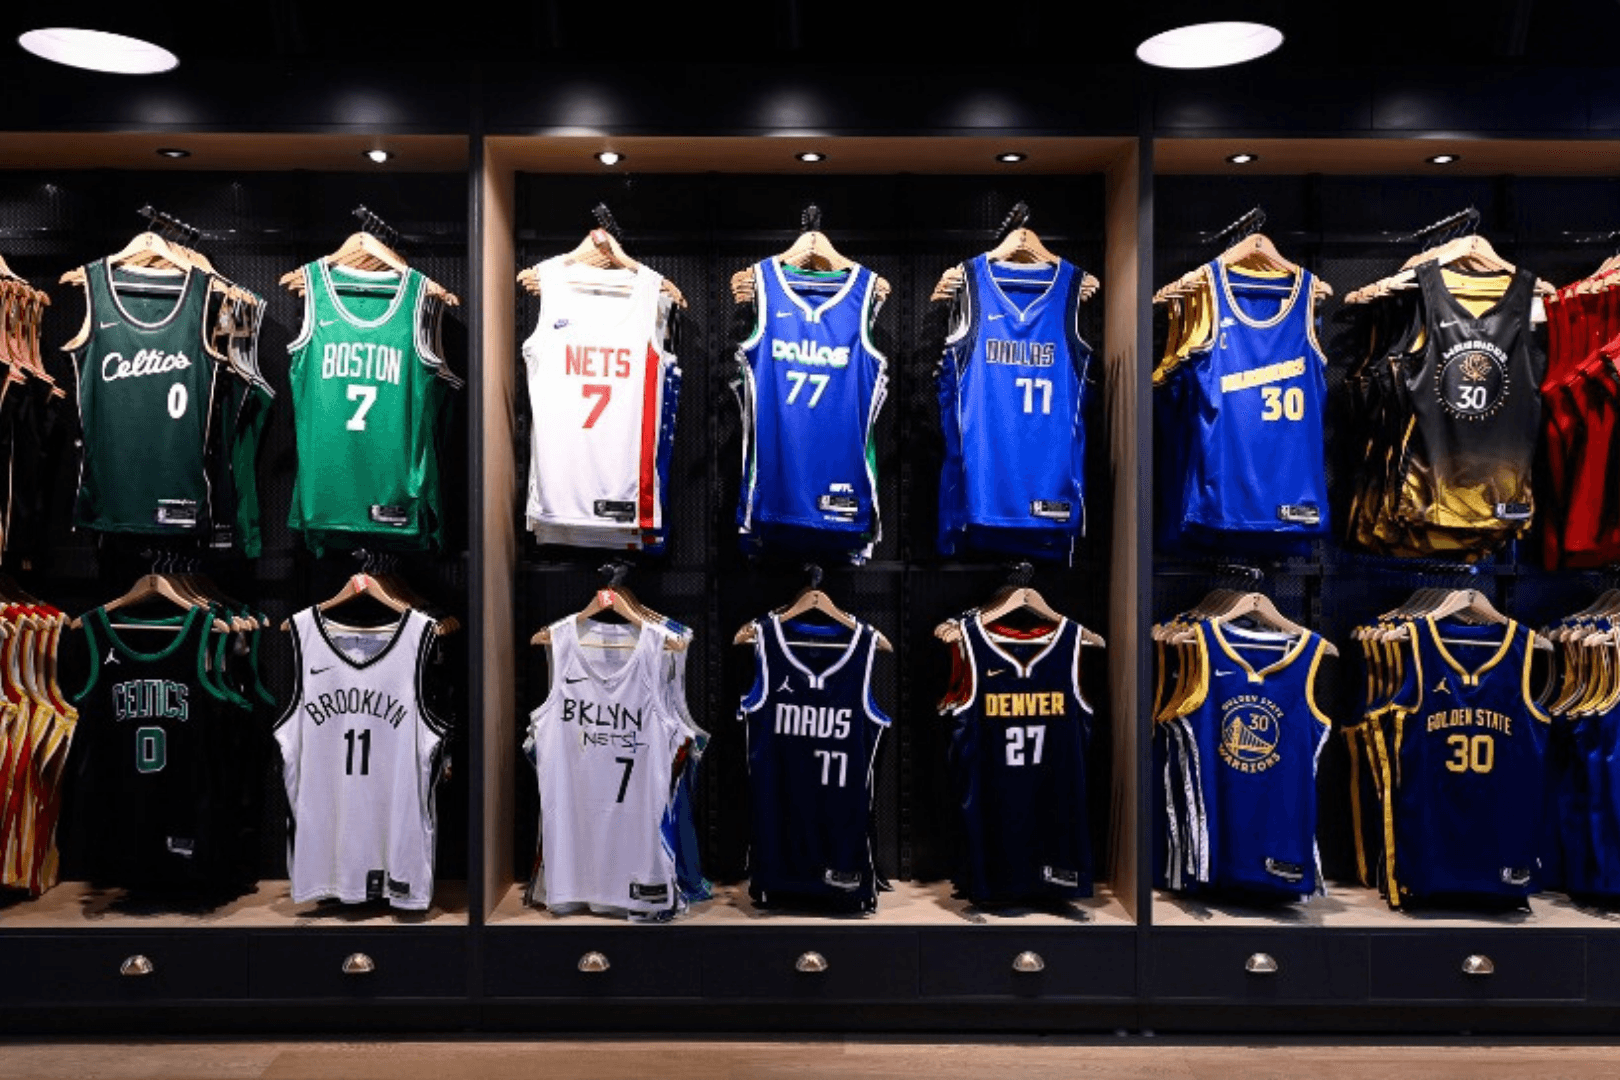 All Sports Culture on X: Top 10 selling NBA uniforms in 2023 🏀 1.  Warriors - Steph Curry 2. Bucks - Giannis 3. Grizzlies - Ja Morant 4. Suns  - Devin Booker